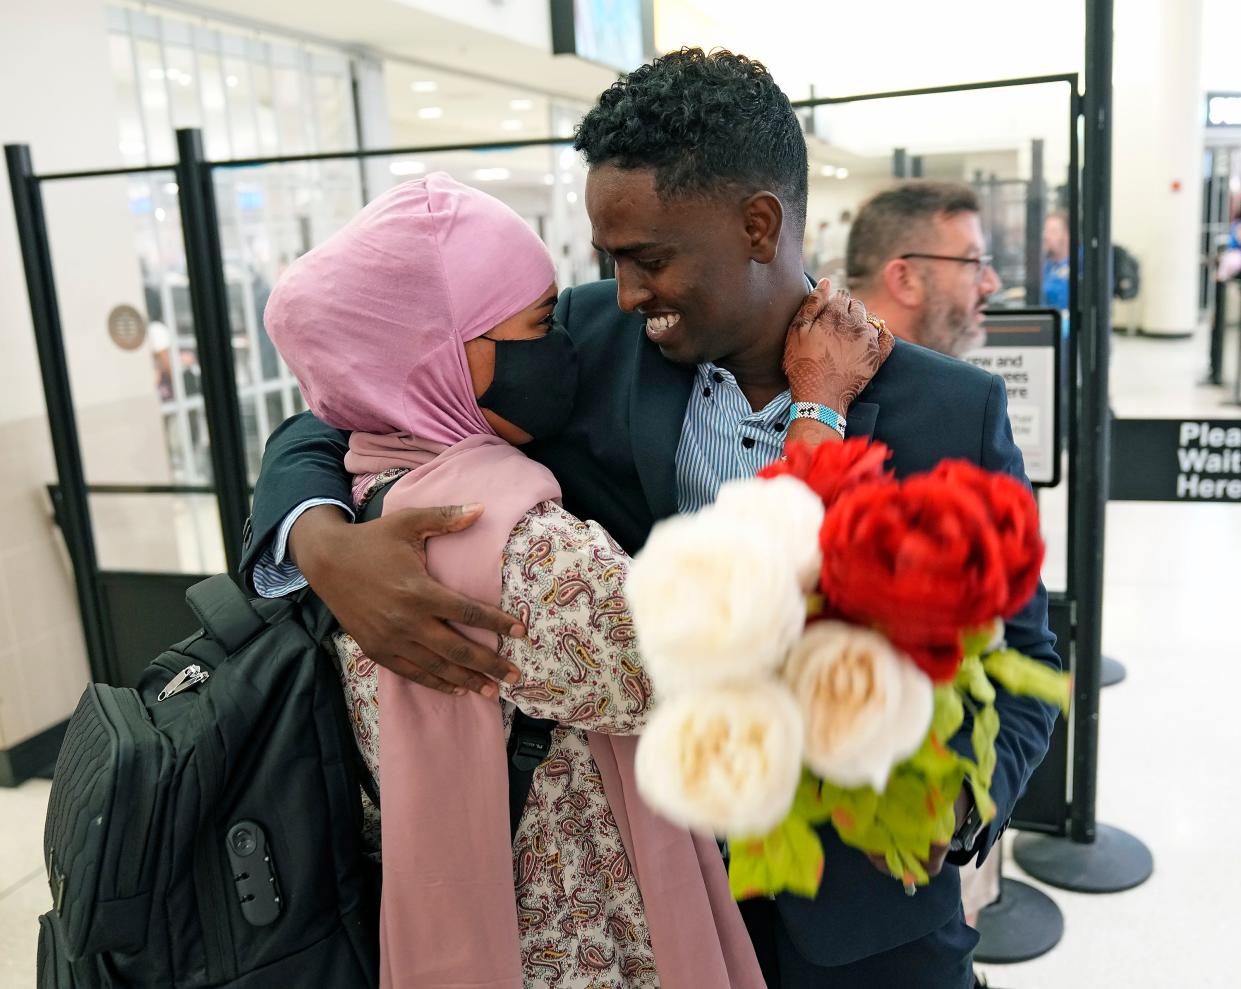 Afkab Hussein smiles while hugging his wife, Rhodo Abdirahman, who arrived from Kenya at the John Glenn Columbus International Airport on Thursday with their two sons. When Hussein arrived in the U.S. in 2015, his pregnant wife was still in the Kenyan refugee camp where they met, but they were assured that Abdirahman could join Hussein soon after he left. That was almost seven years ago.